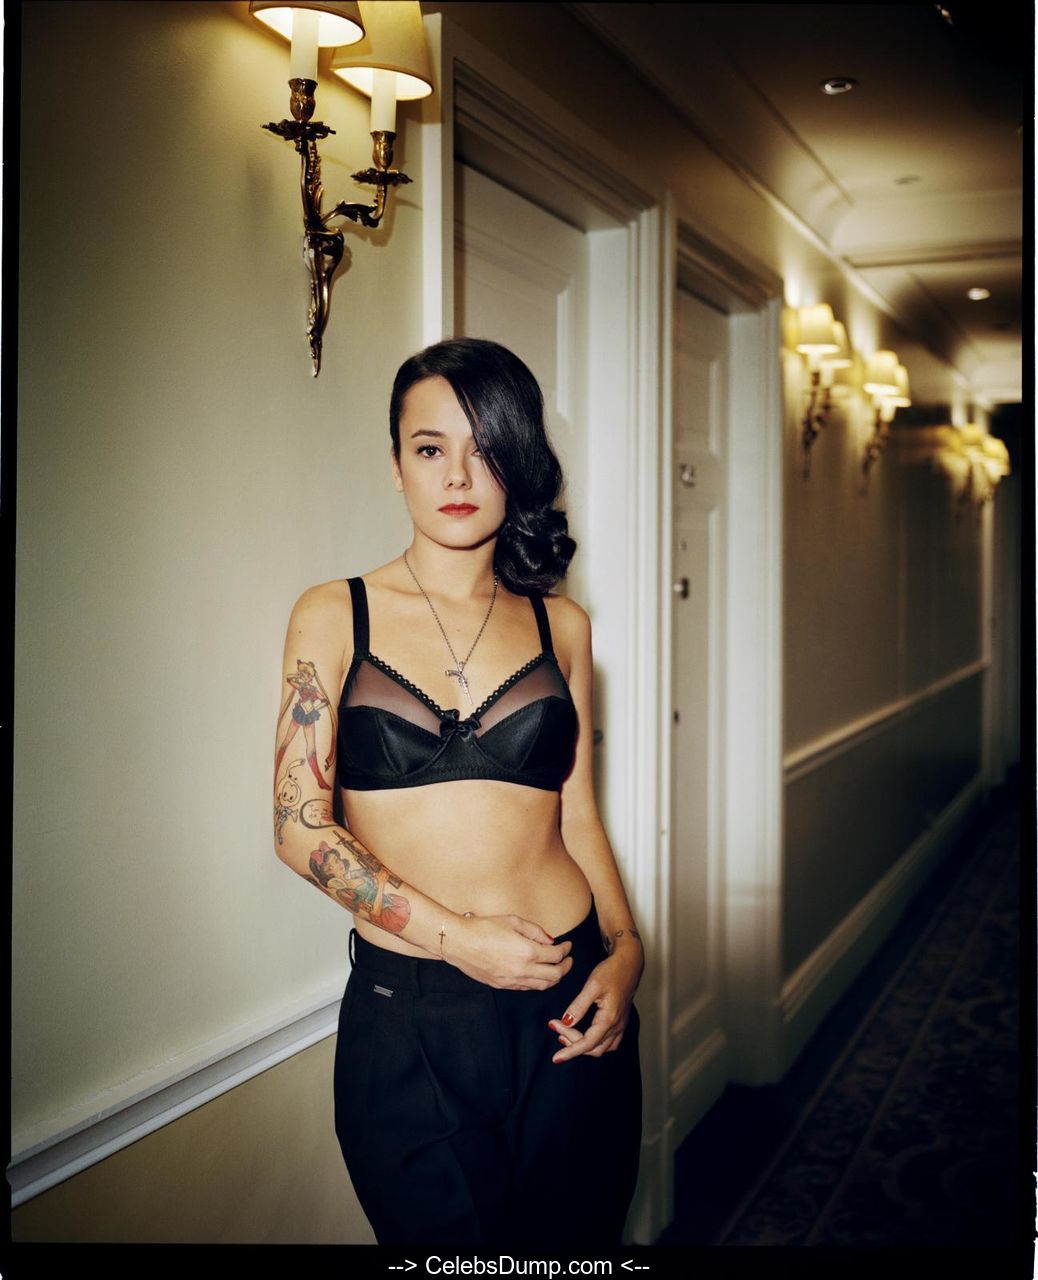 Alizee sexy and braless for Julien Lachaussee photoshoot 2013.